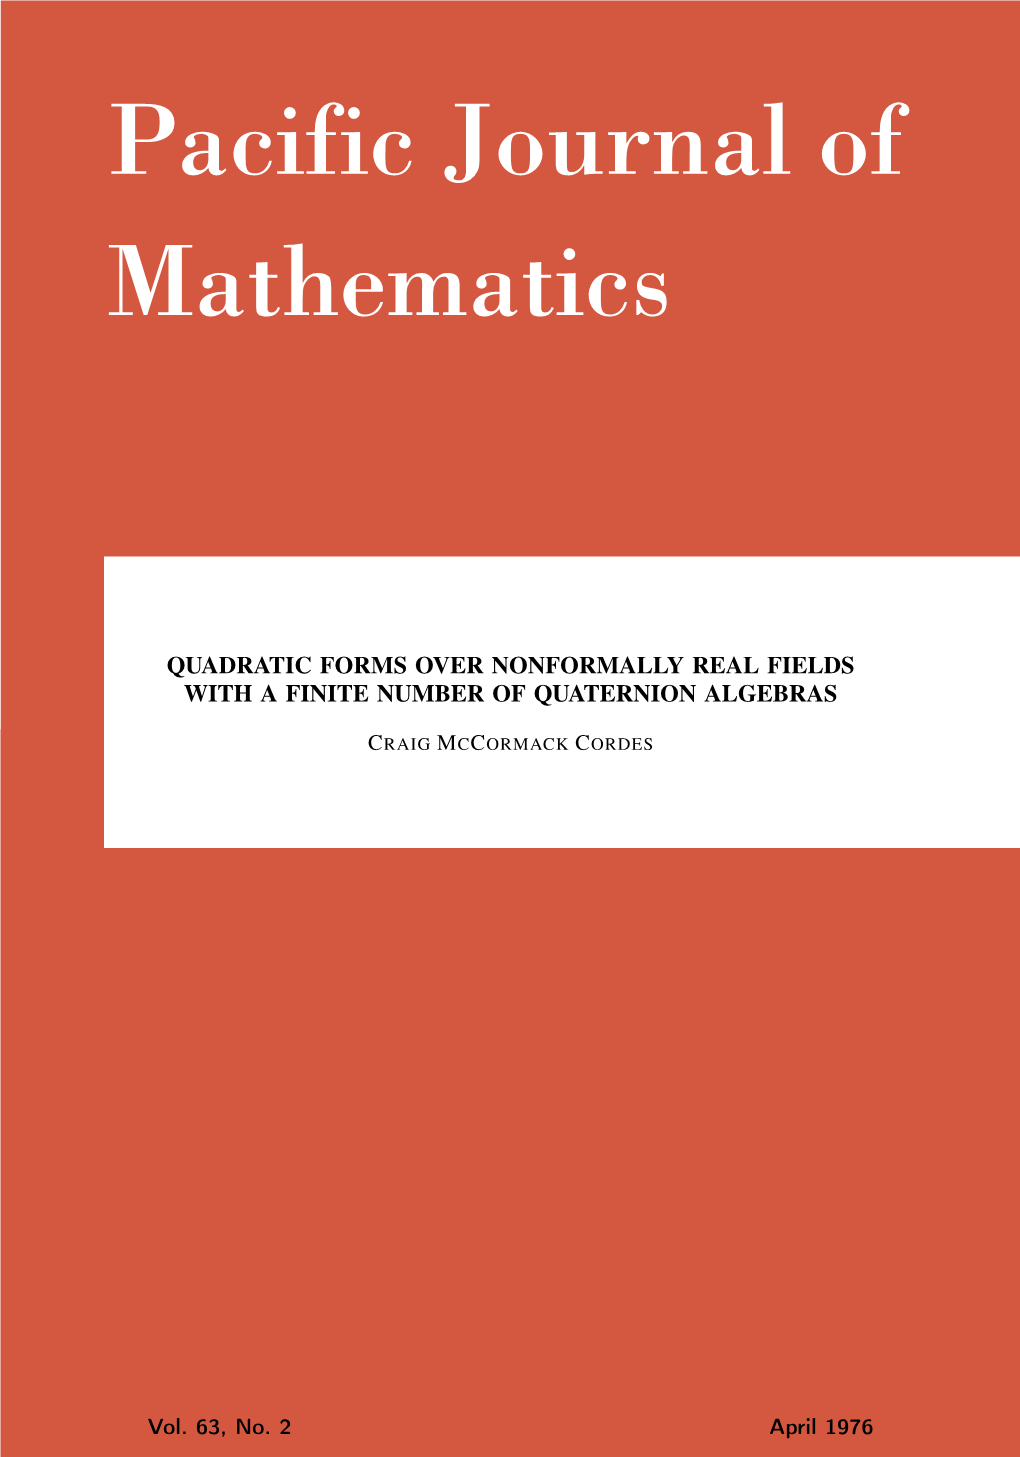 Quadratic Forms Over Nonformally Real Fields with a Finite Number of Quaternion Algebras